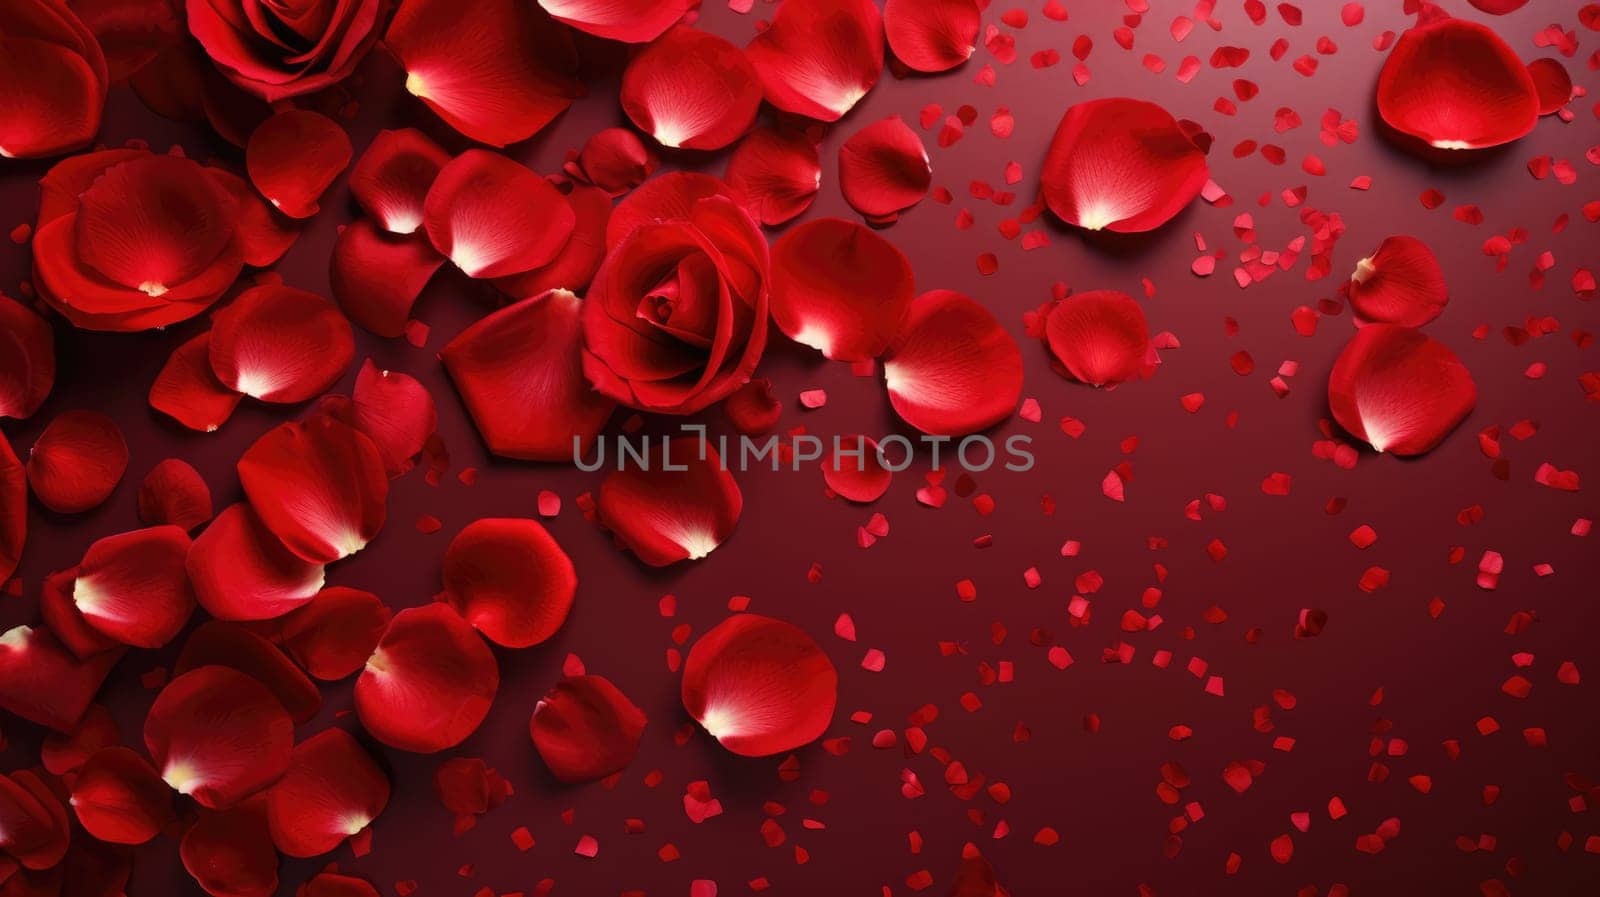 Red roses petals and sprinkles confetti for a holiday celebration 14th februaryAI